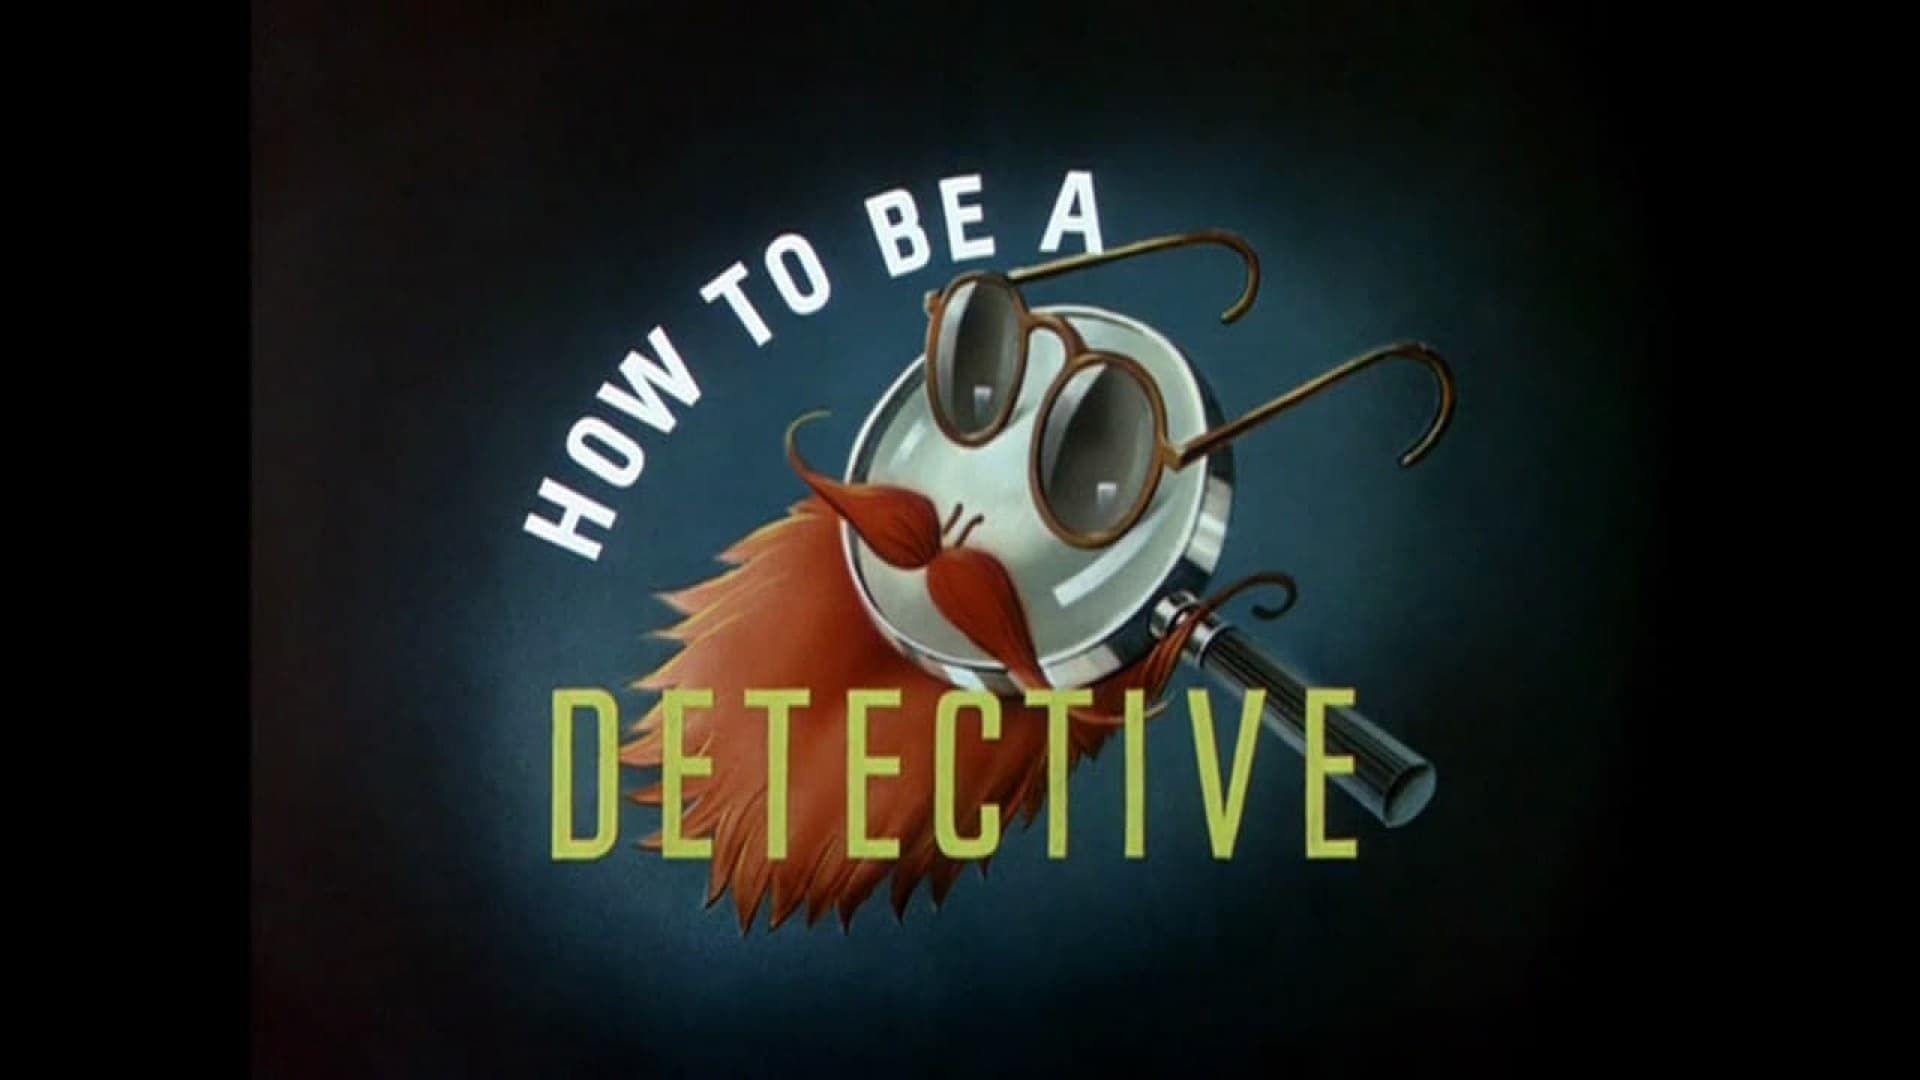 How to Be a Detective background